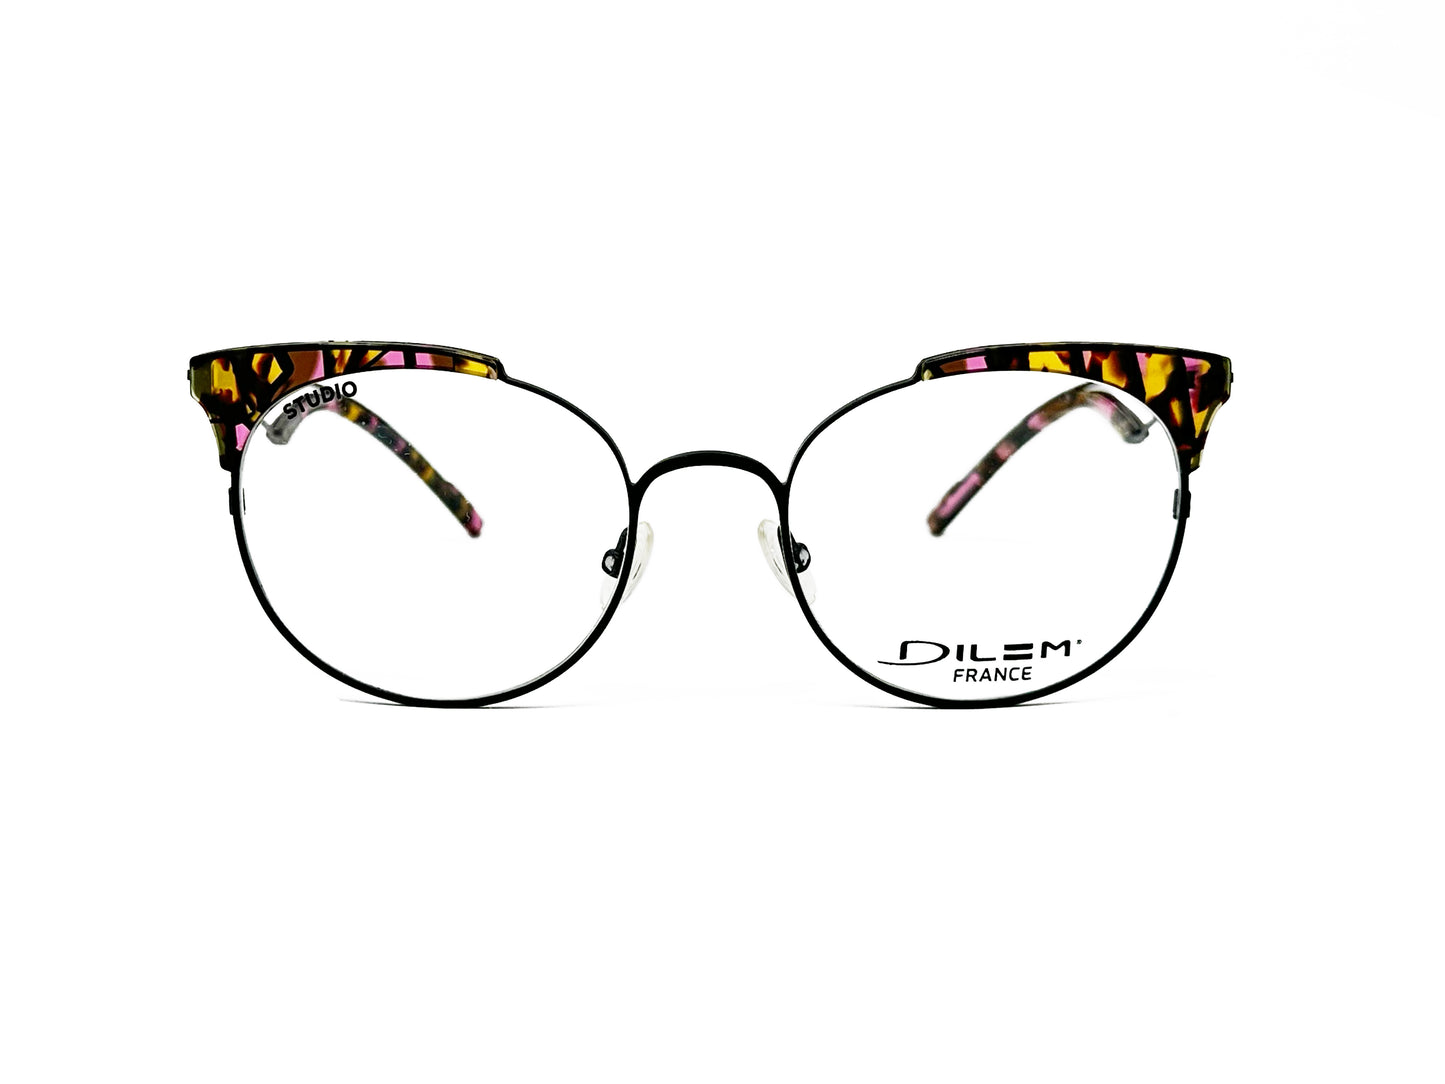 Dilem round , metal, with cat-eye acetate tips optical frame. Model: Z1b103D. Color: 3ASB01D - Yellow/Purple tortoise tips with black metal frame. Front view. 